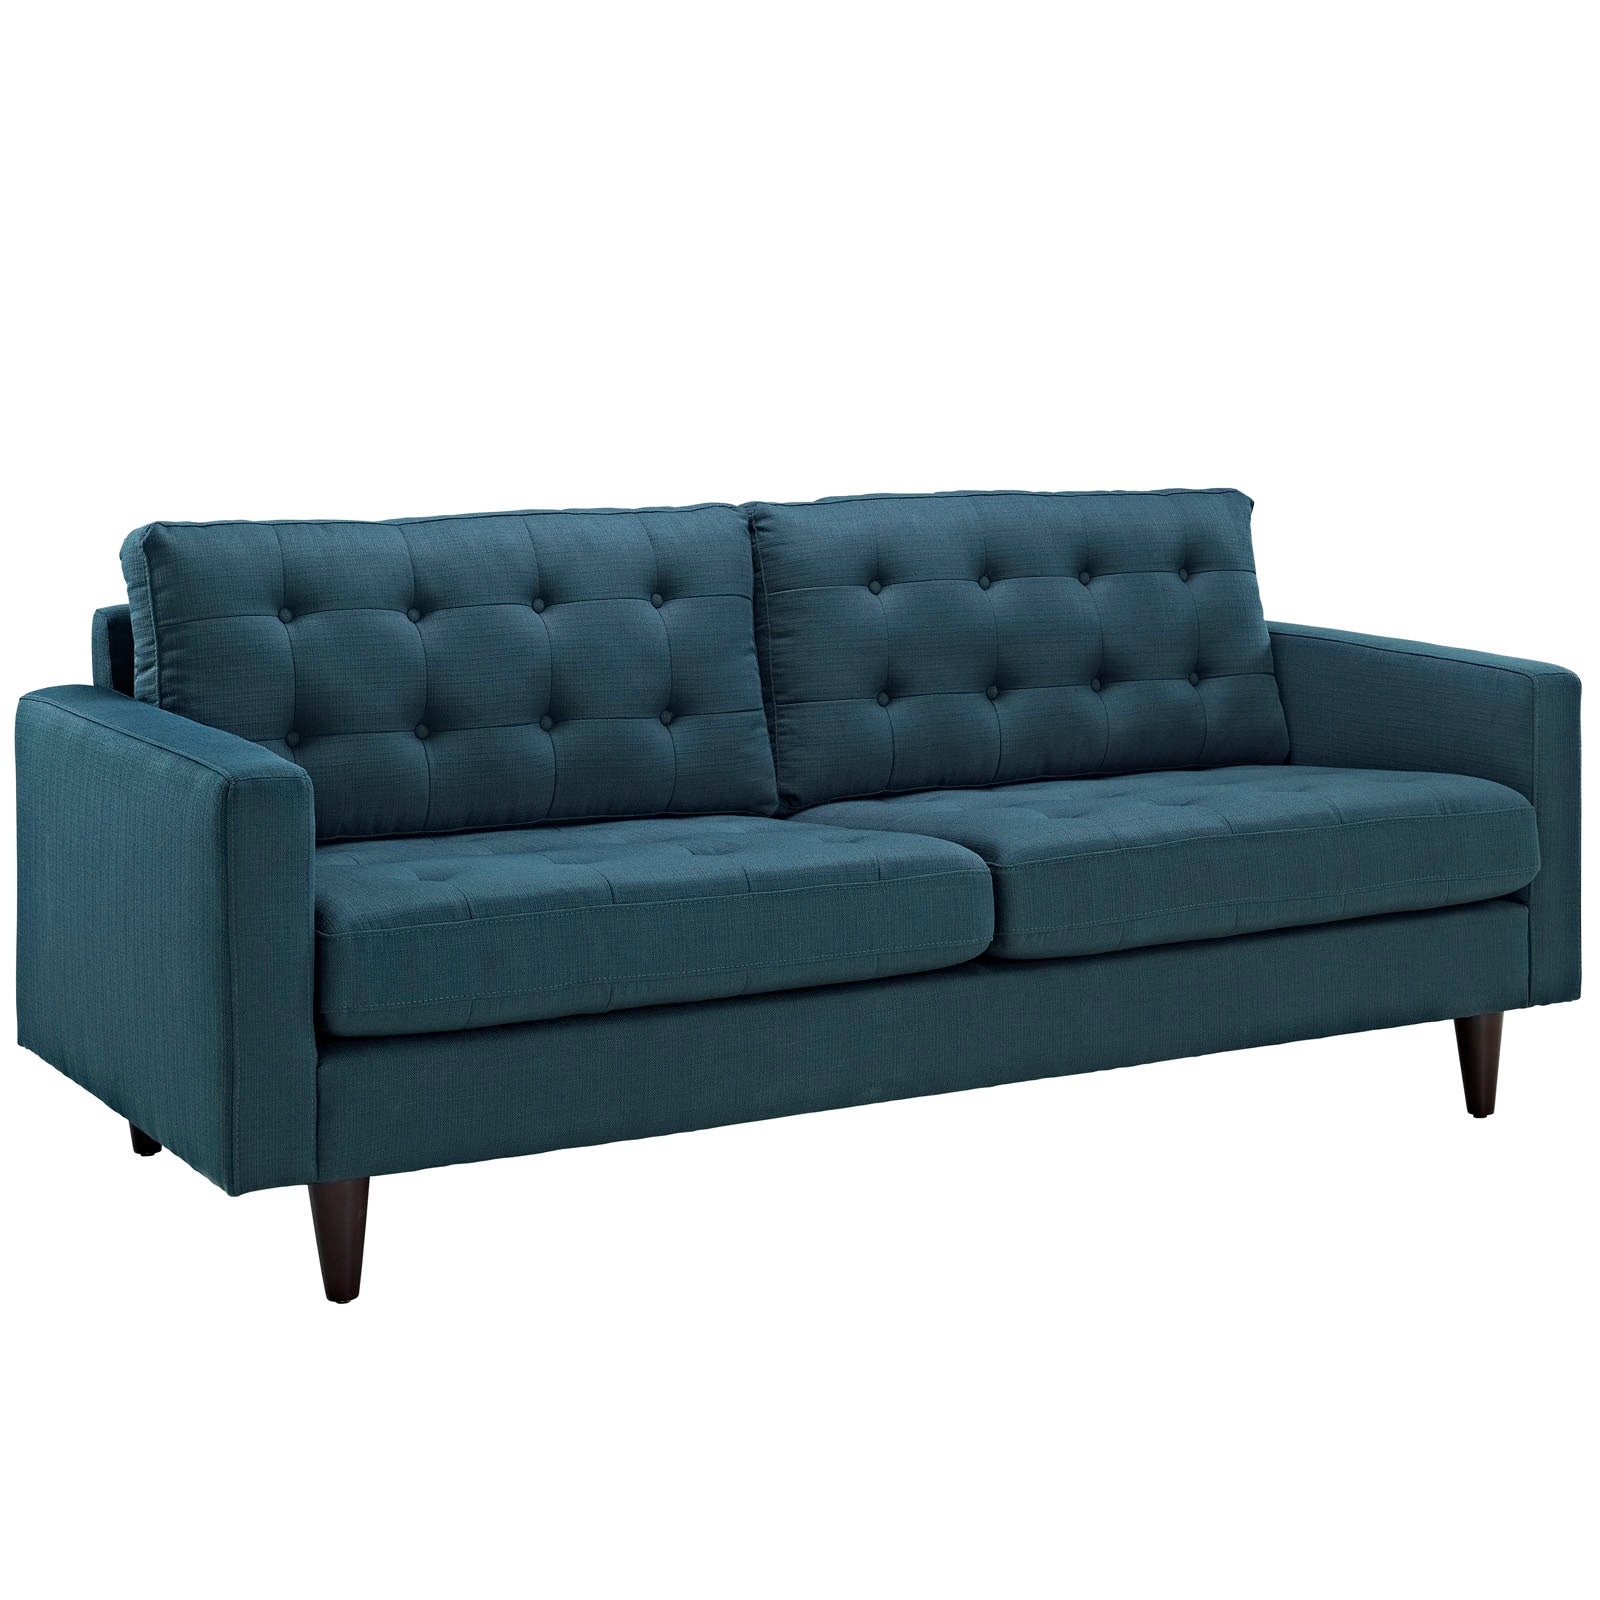 Modway Accent Chairs - Empress Sofa and Armchairs ( Set of 3 ) Azure